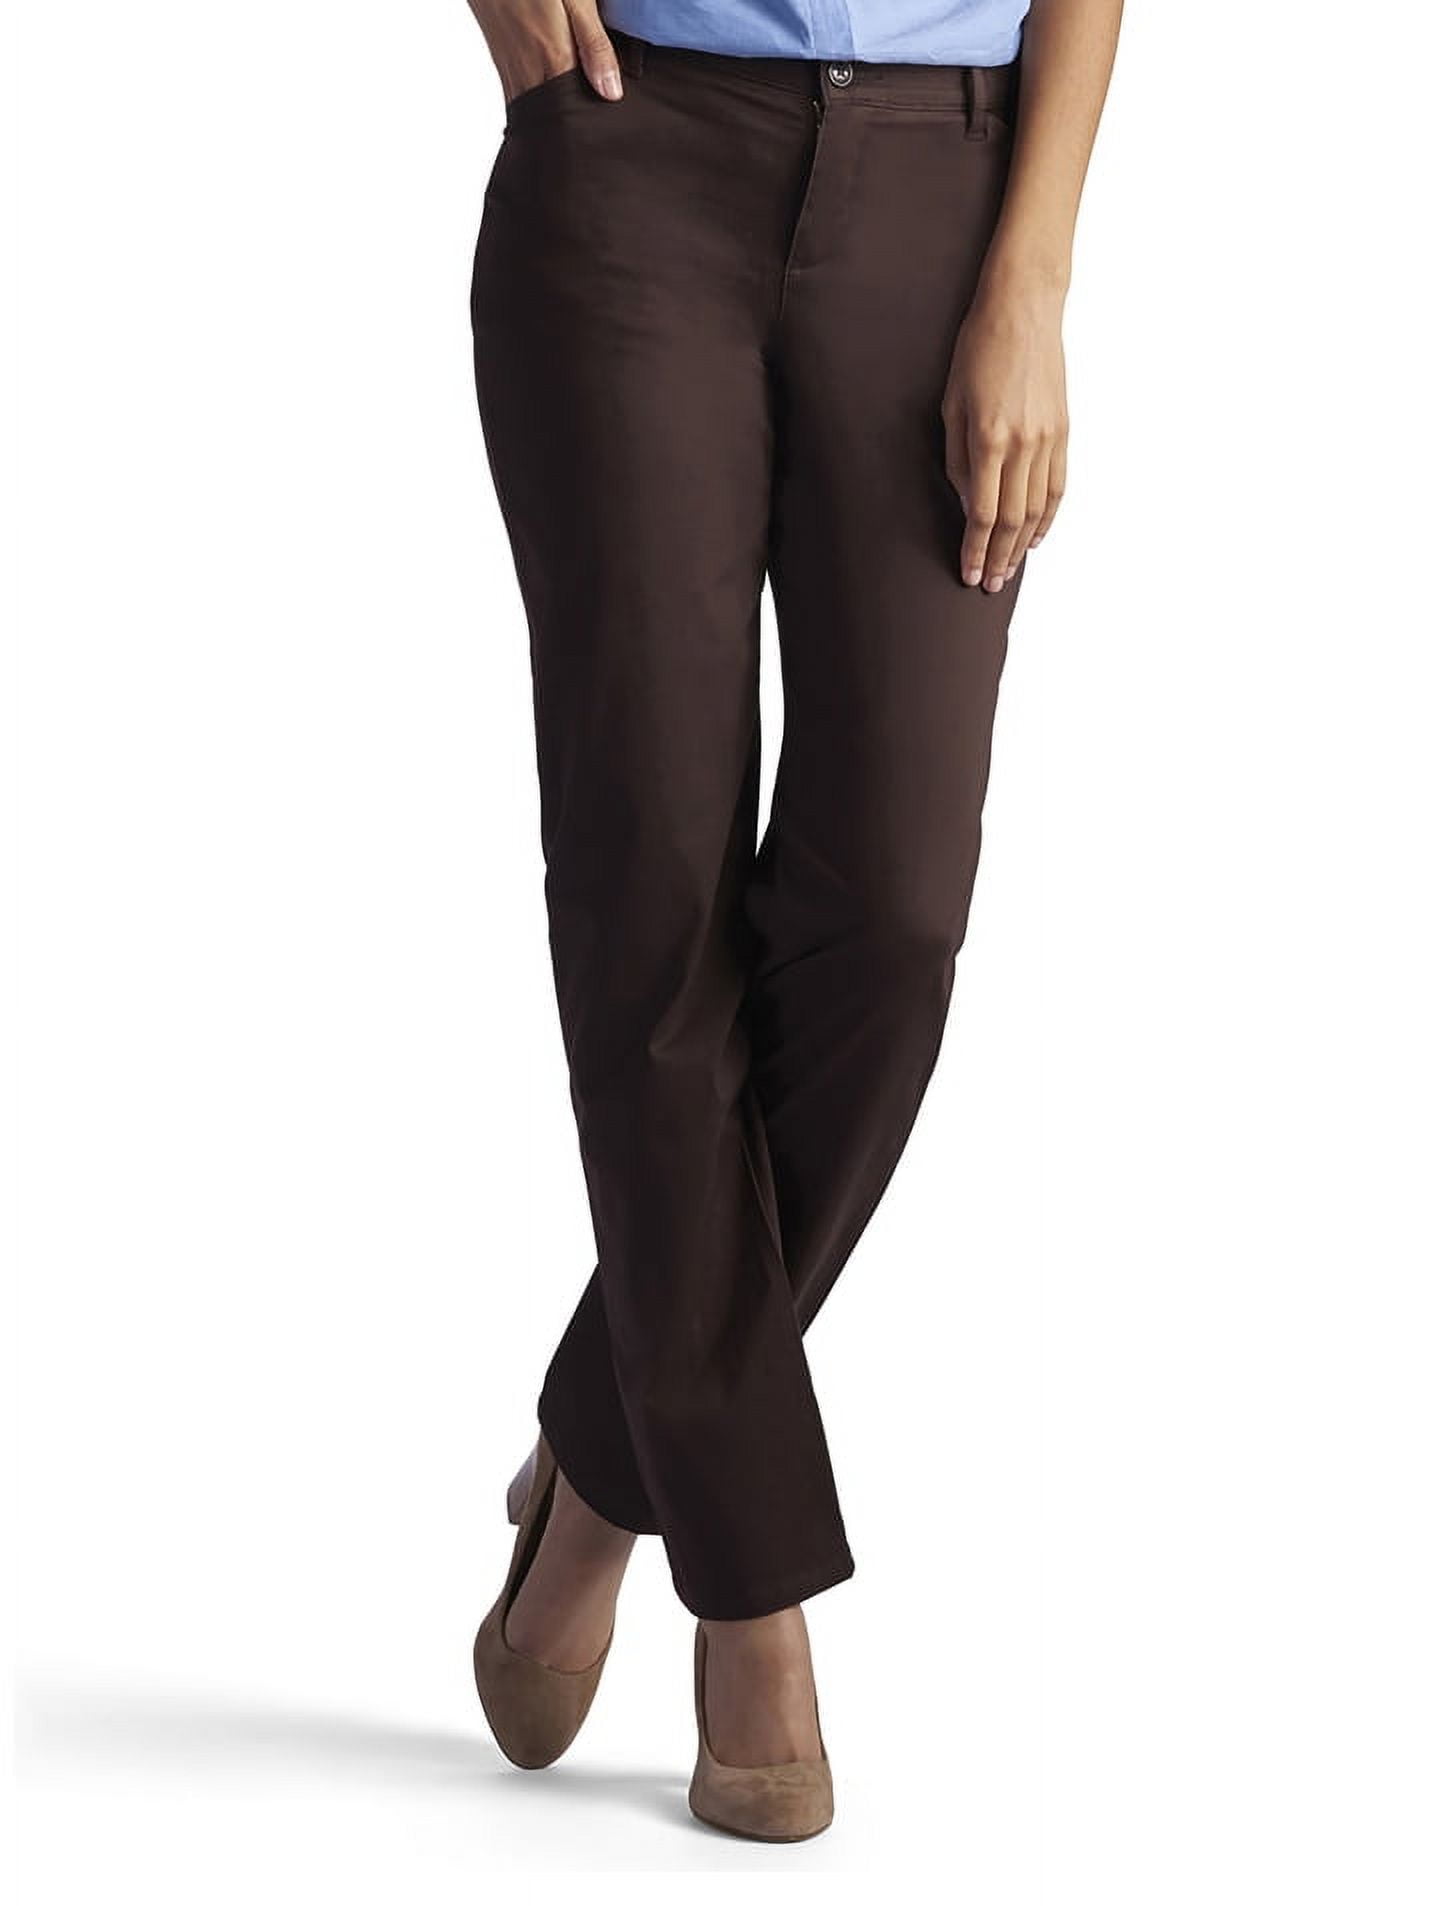 Lee Women's Relaxed Fit All Day Straight Leg Pants - Charcoal